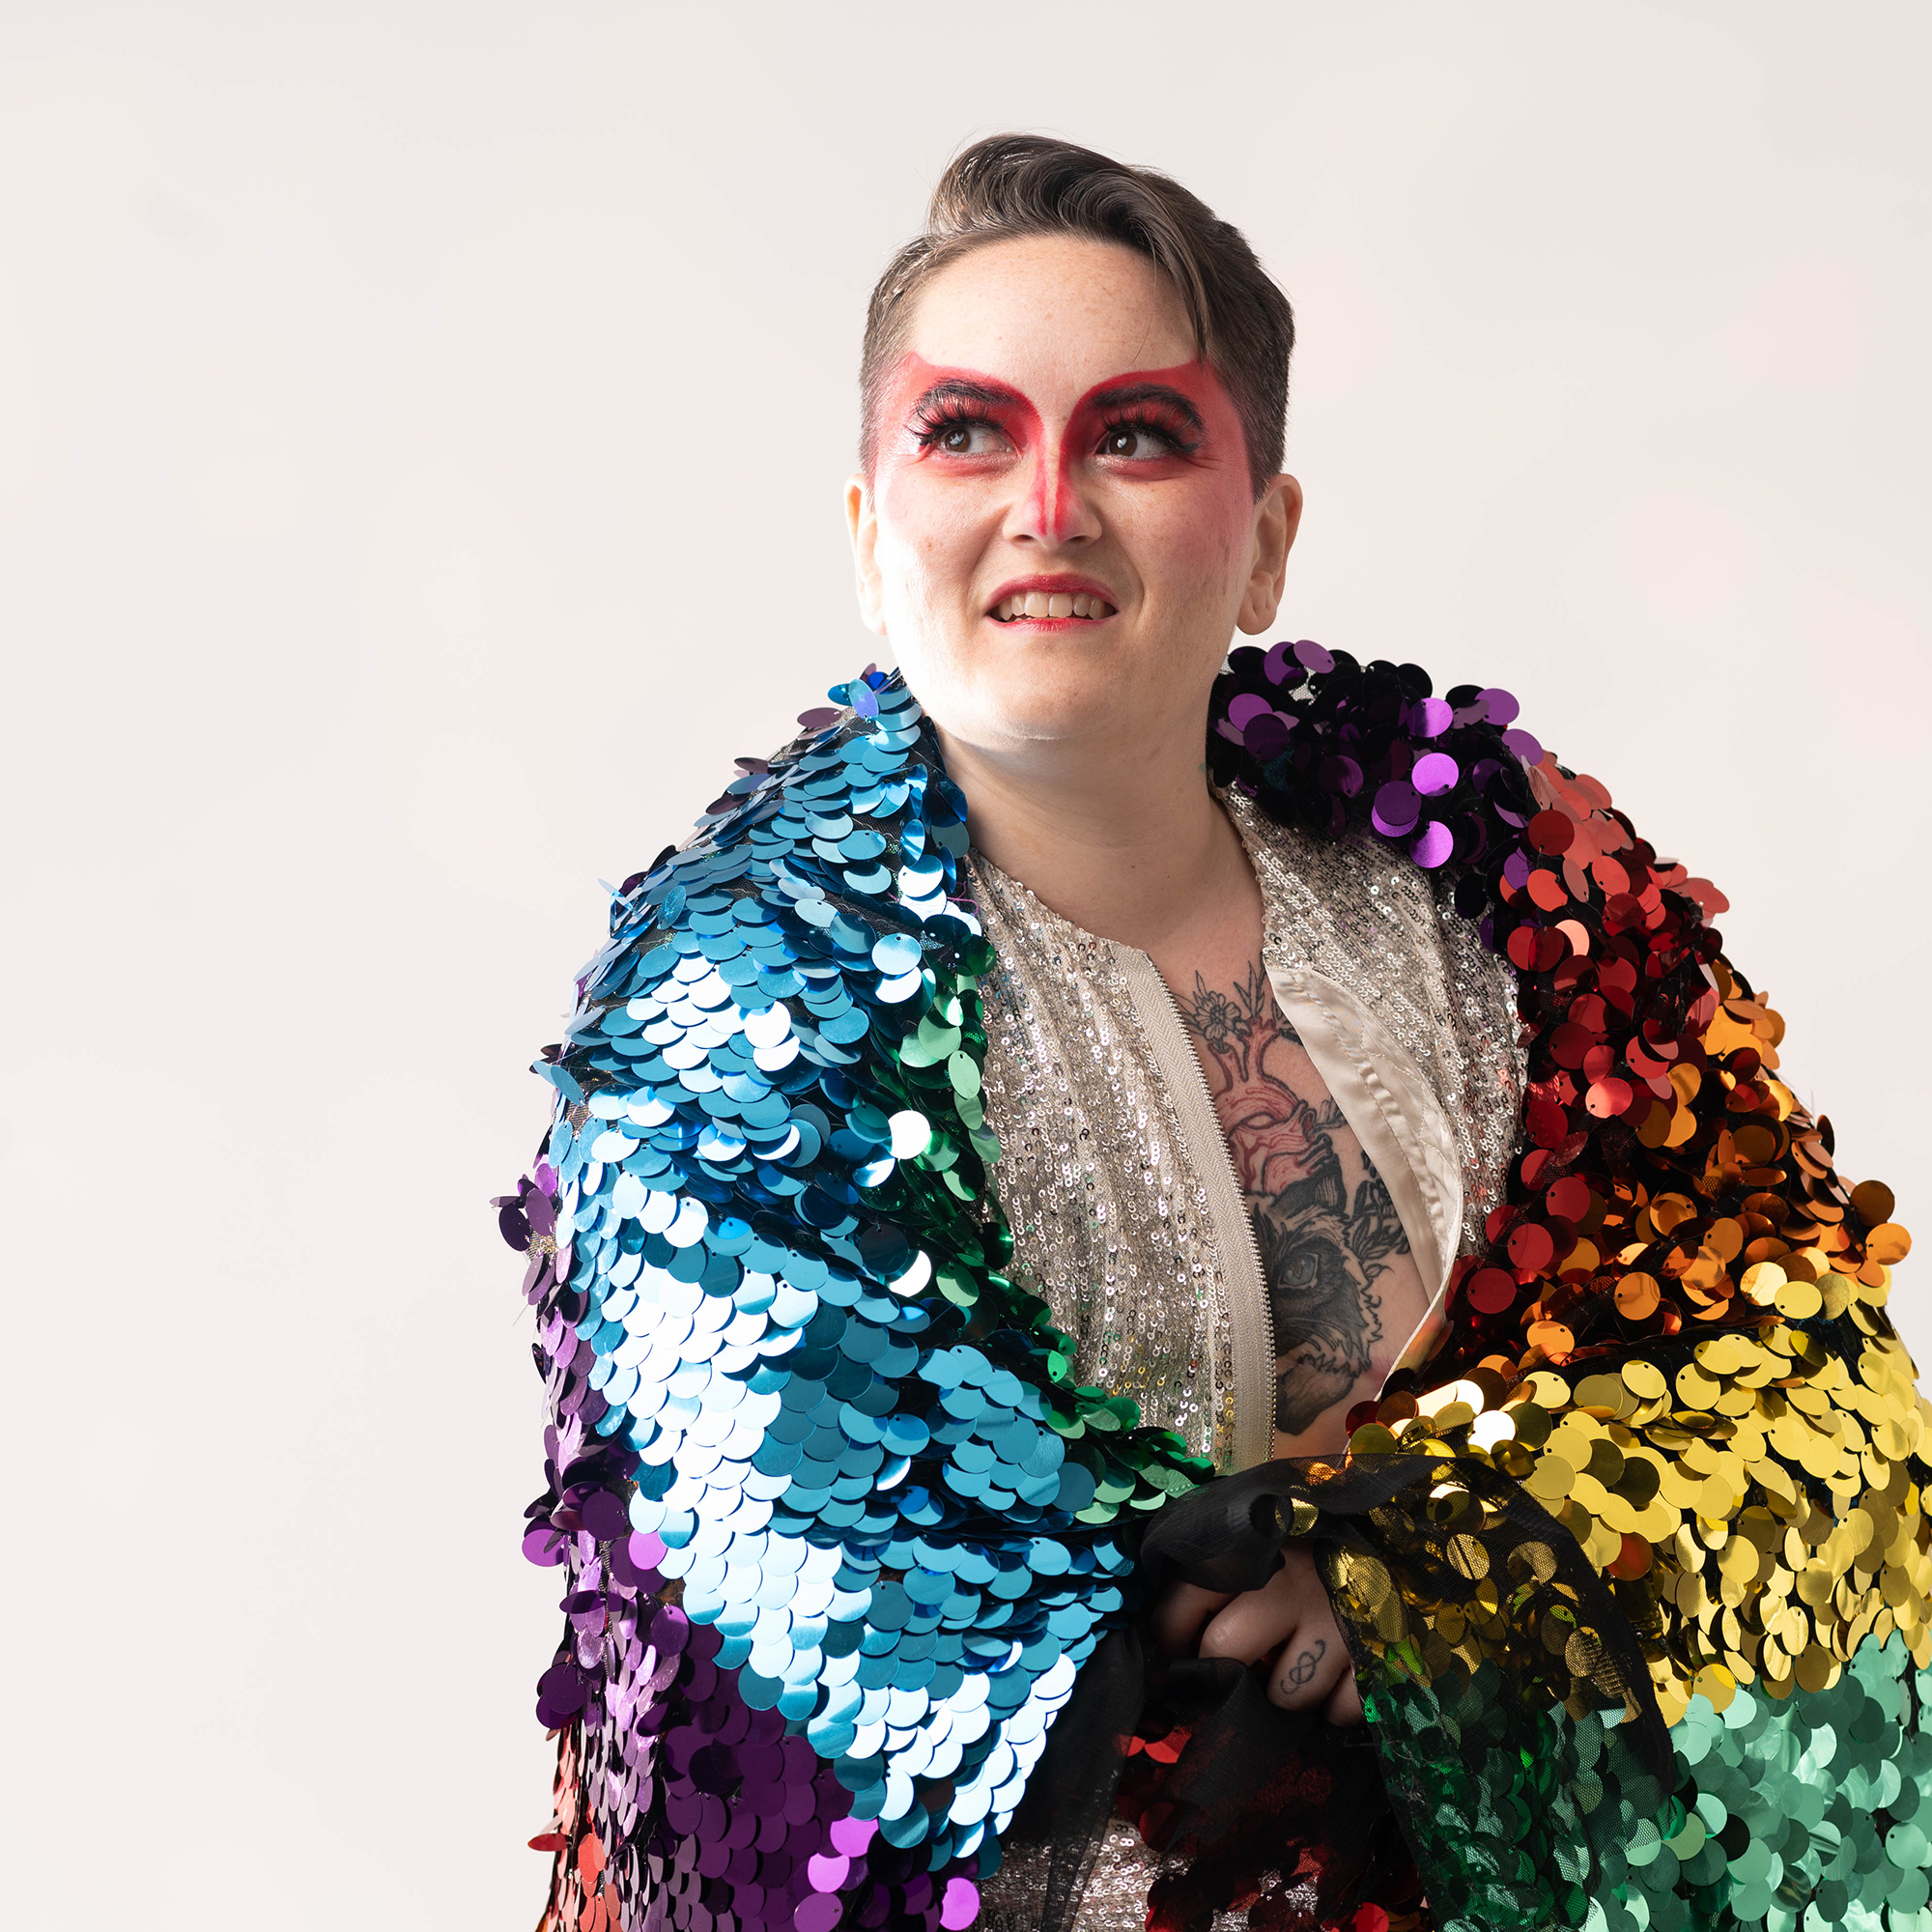 Chris wearing kabuki-style red eye makeup and draped in a rainbow colored sequin blanket